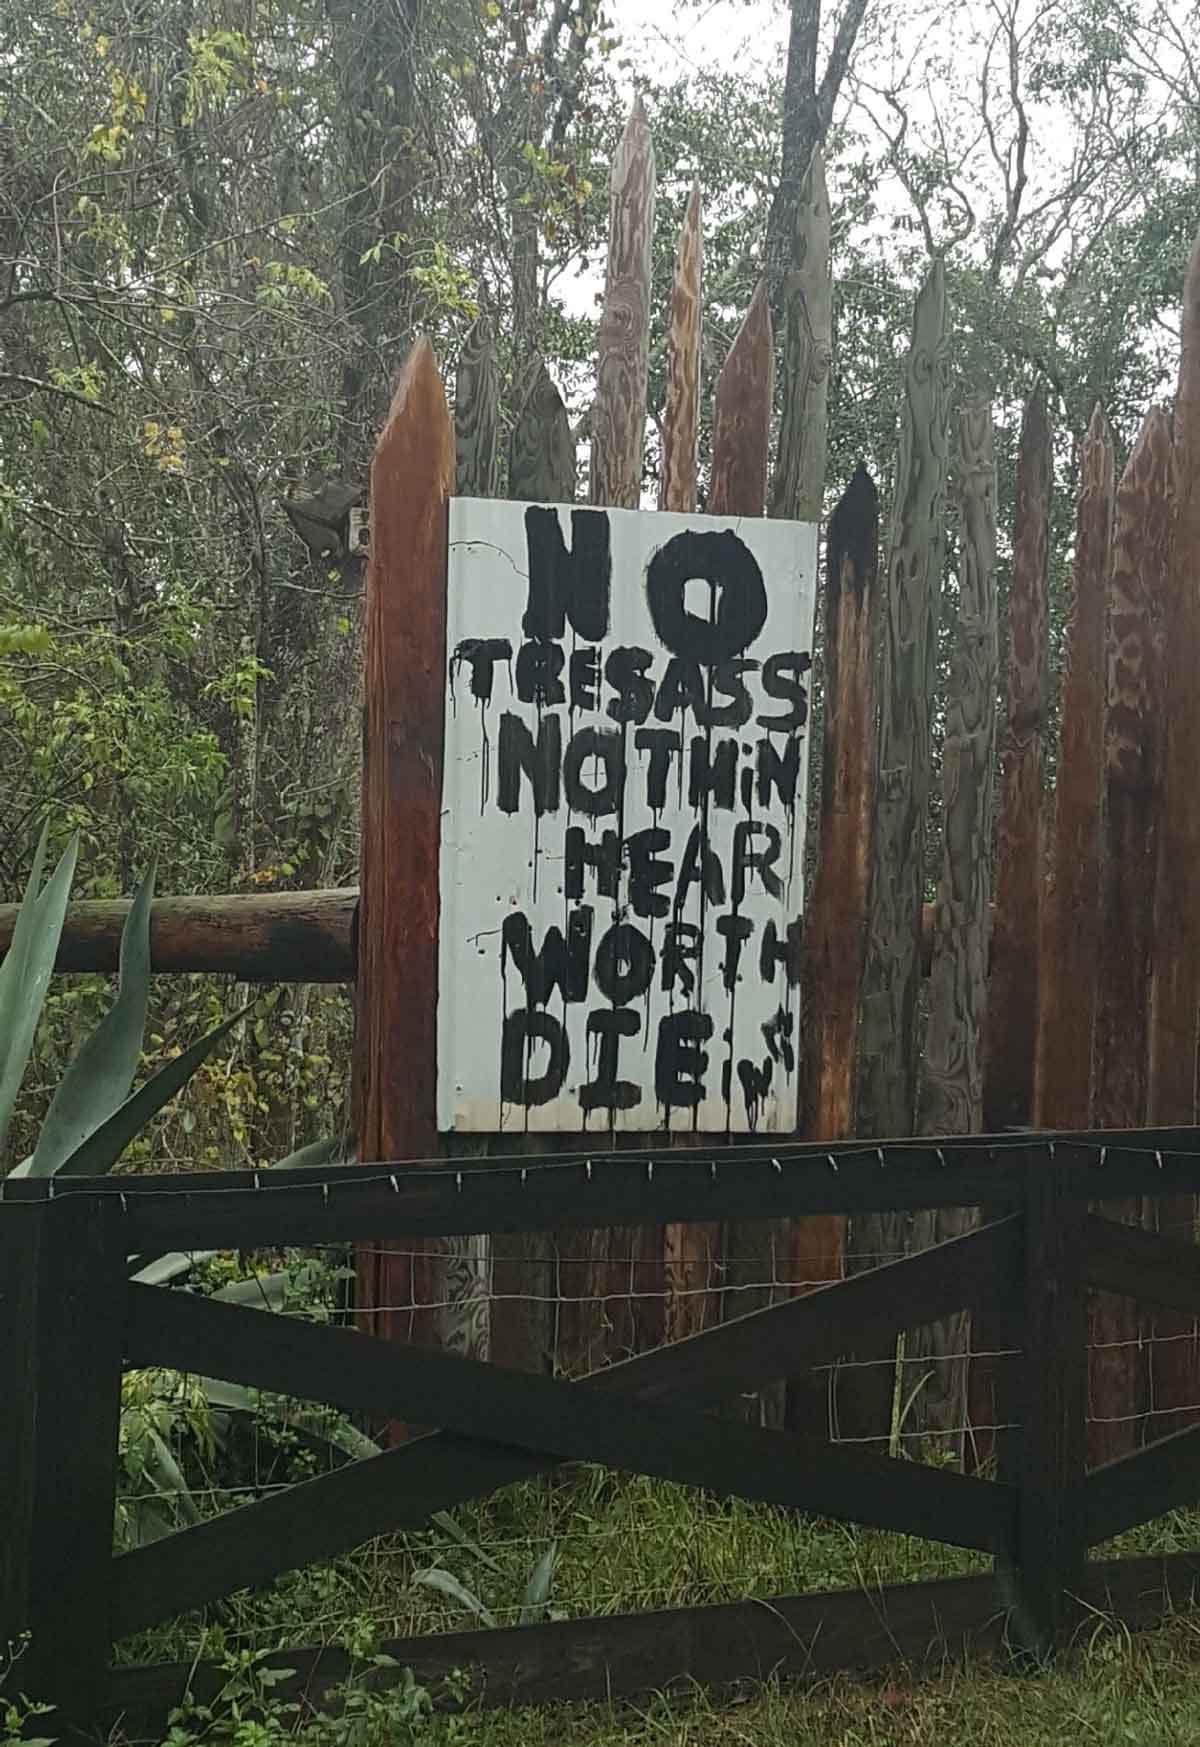 Tresassers be warned. Seen in Florida